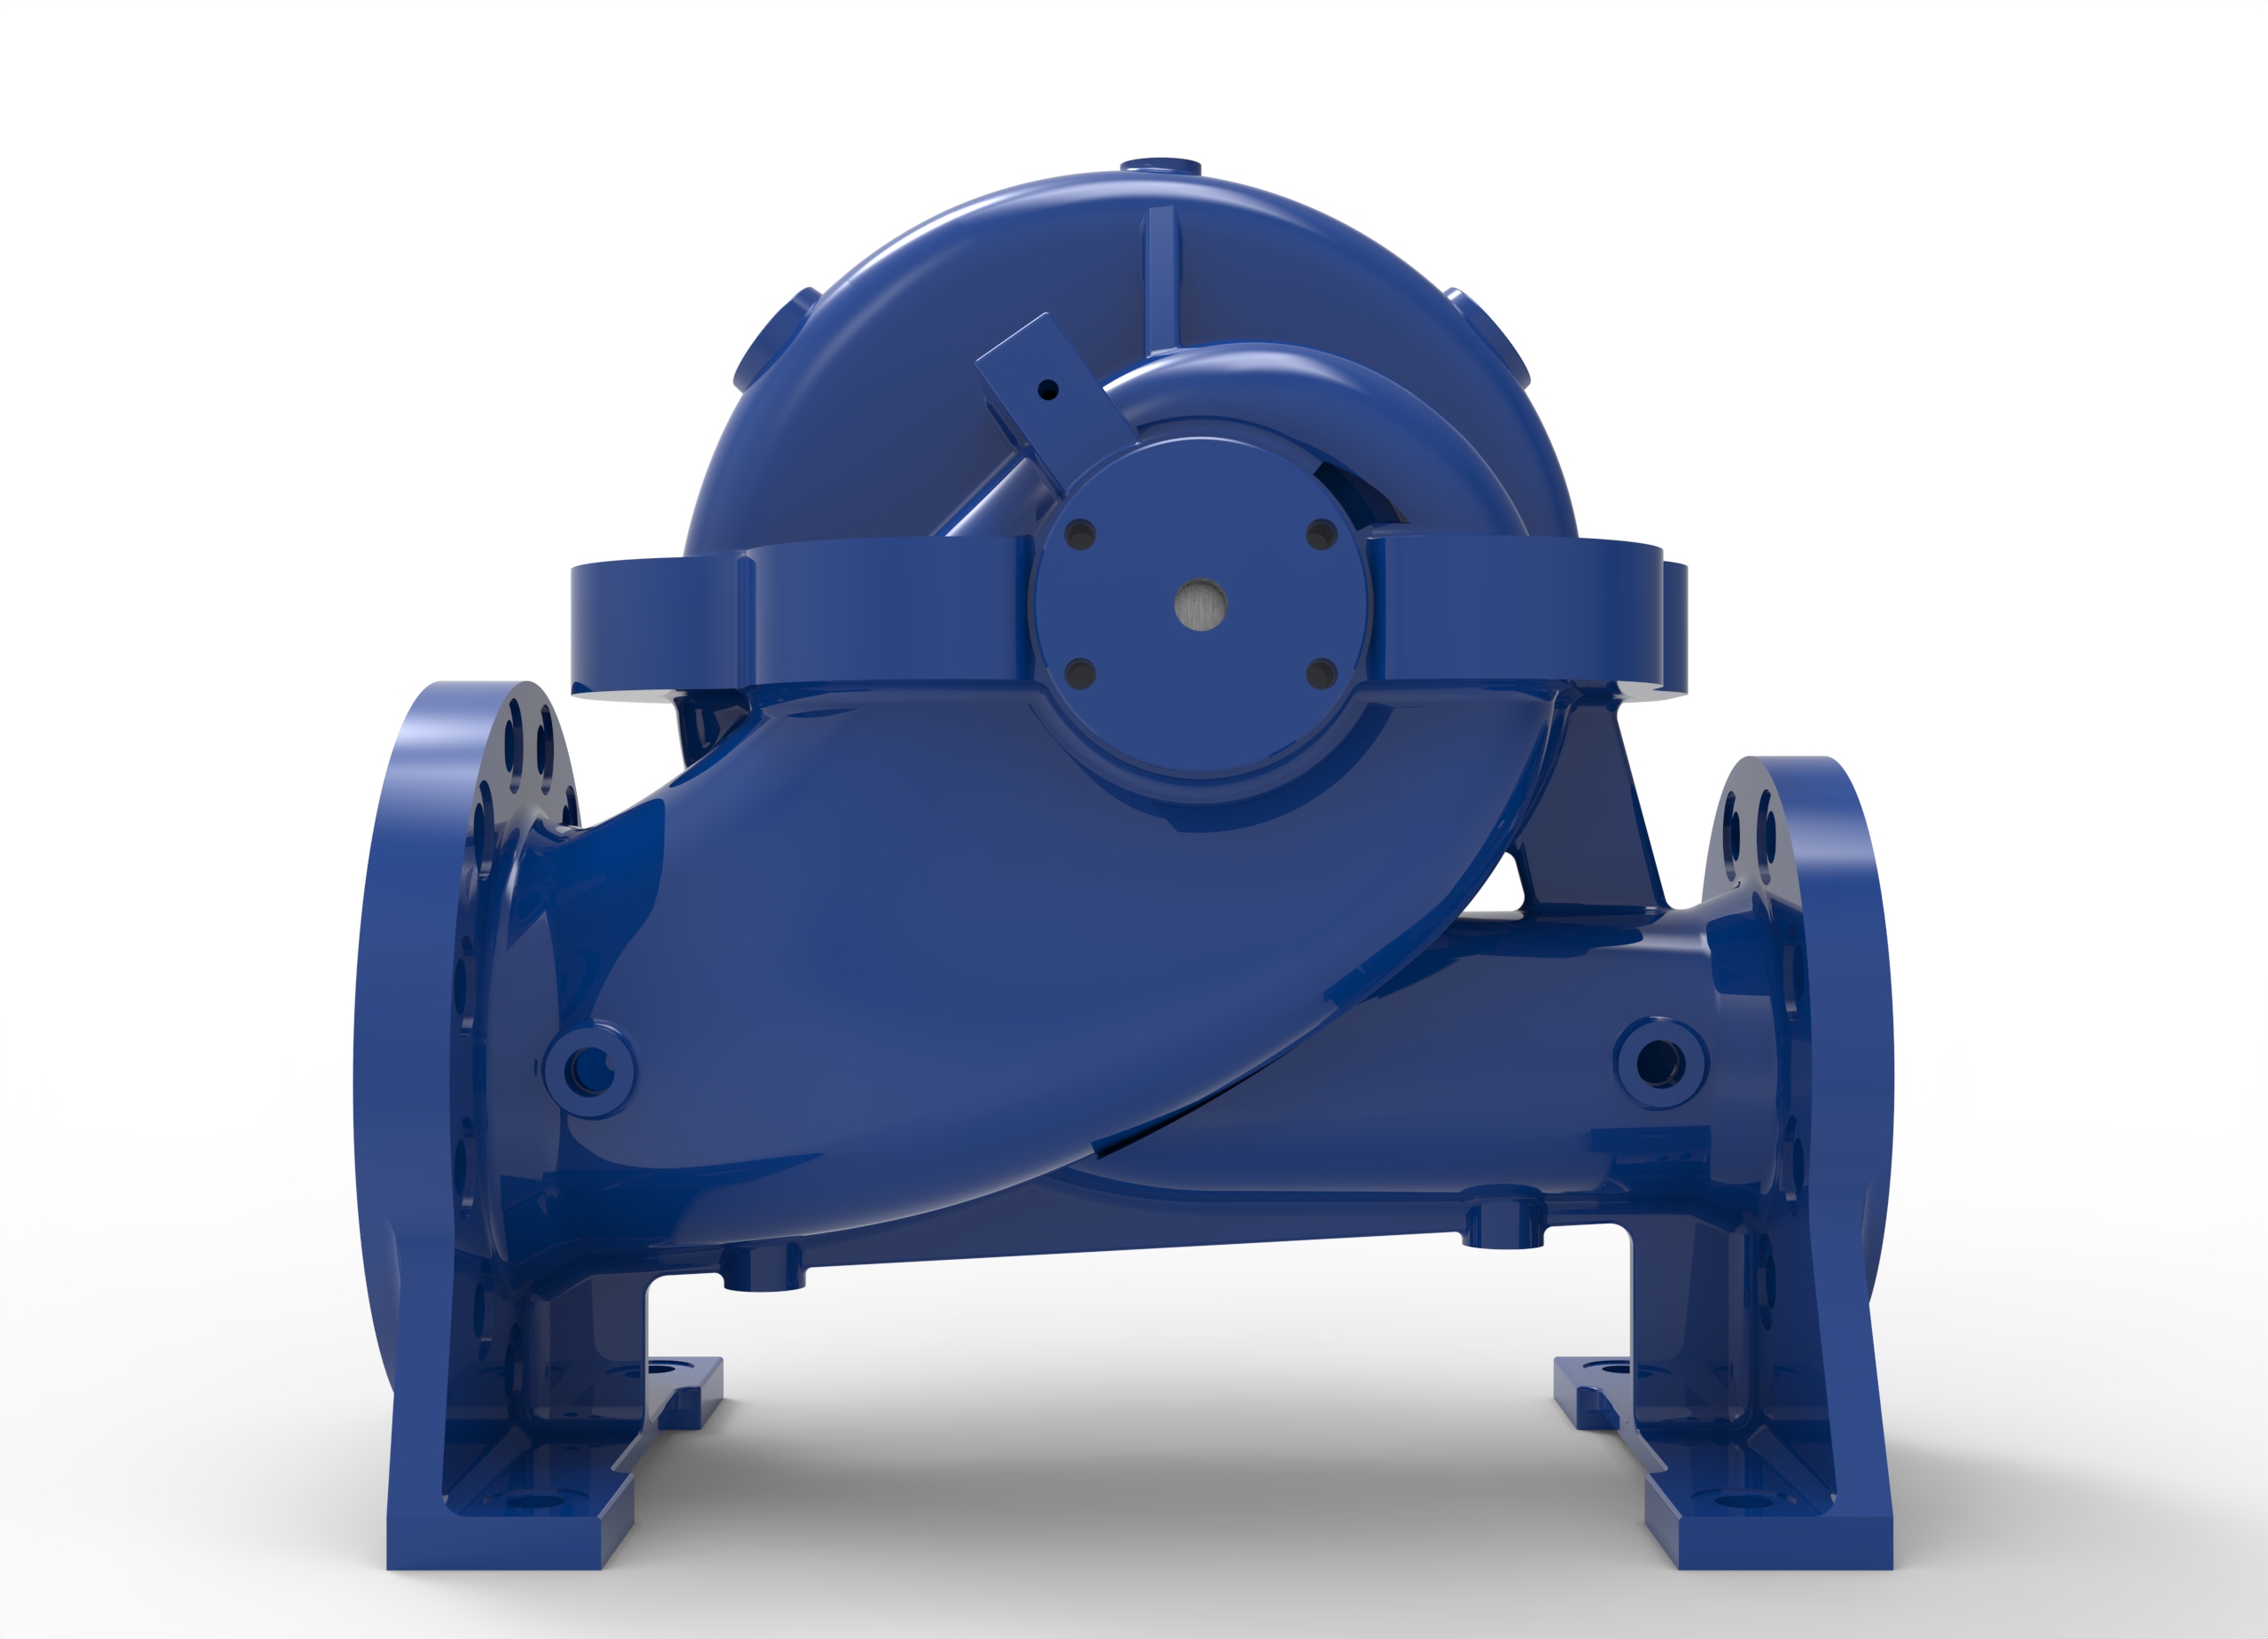 Front view of a Termomeccanica Pompe HSS Patented Centrifugal Pump manufactured by Trillium Flow Technologies